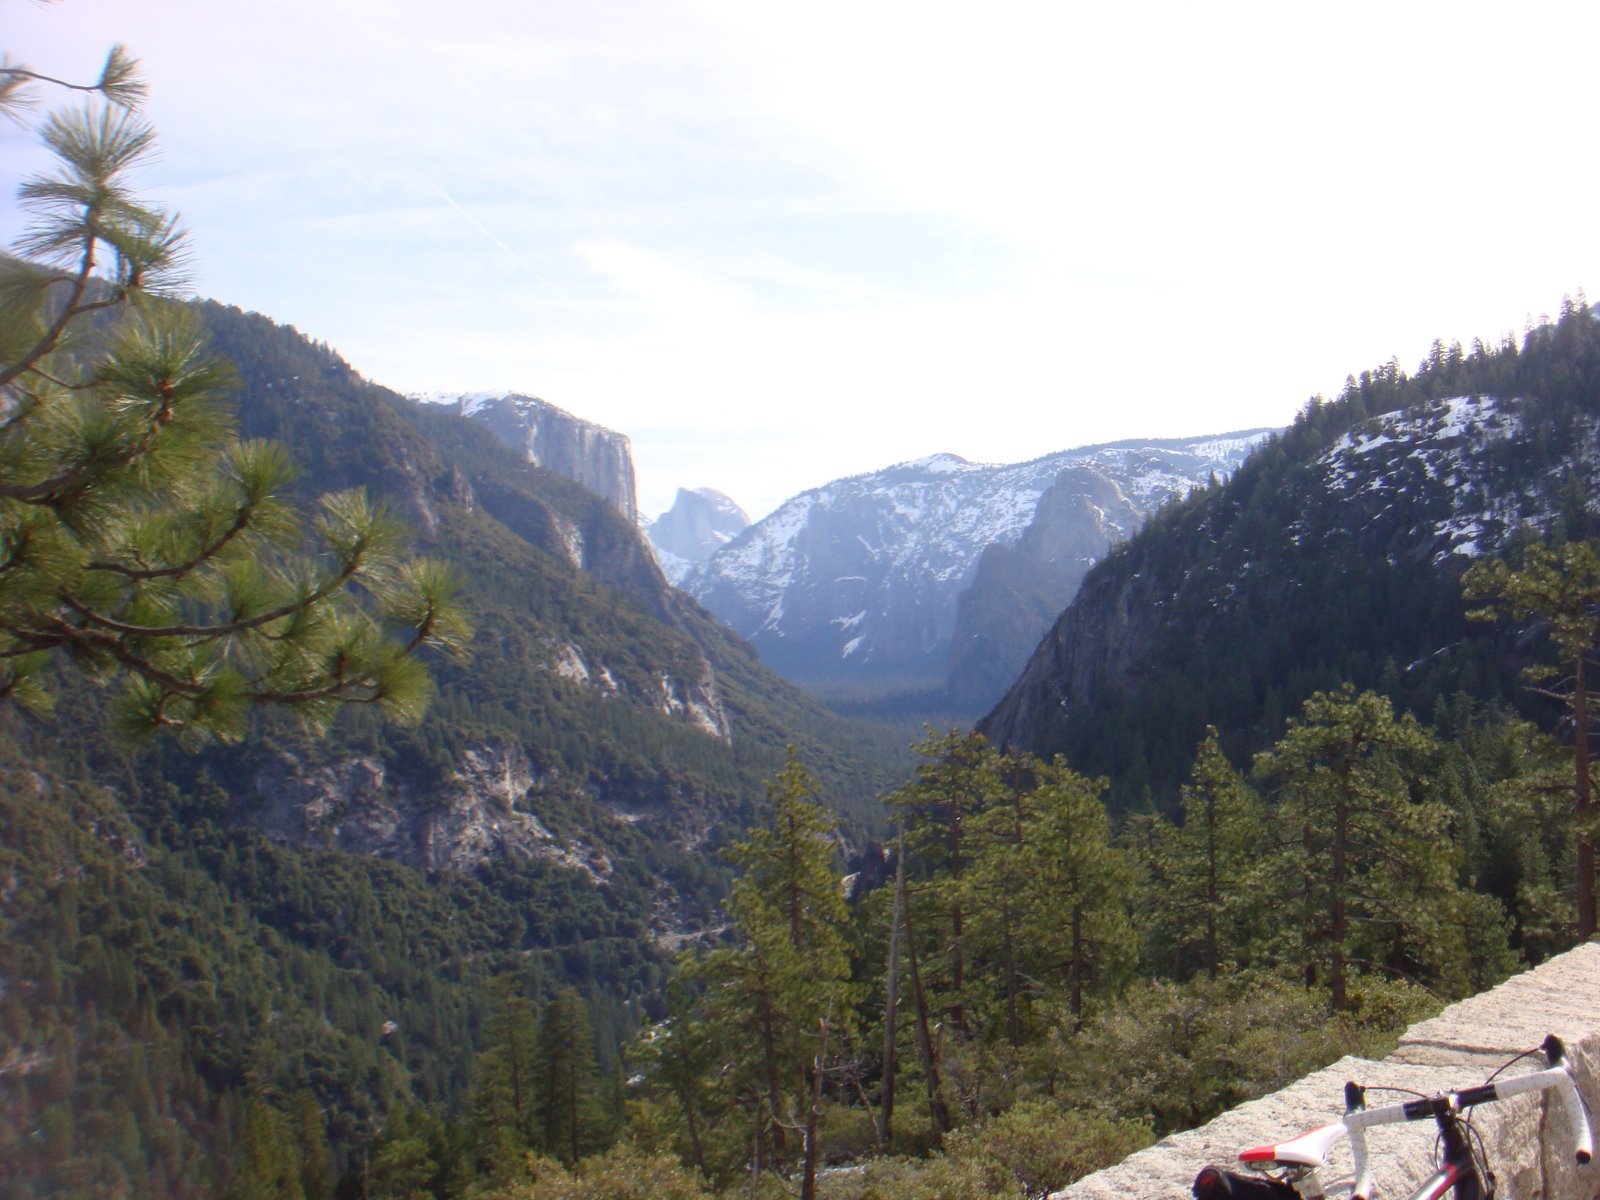 [An+awesome+view+of+Yosemite+Valley+in+Yosemite+National+Park+-+CA.JPG]